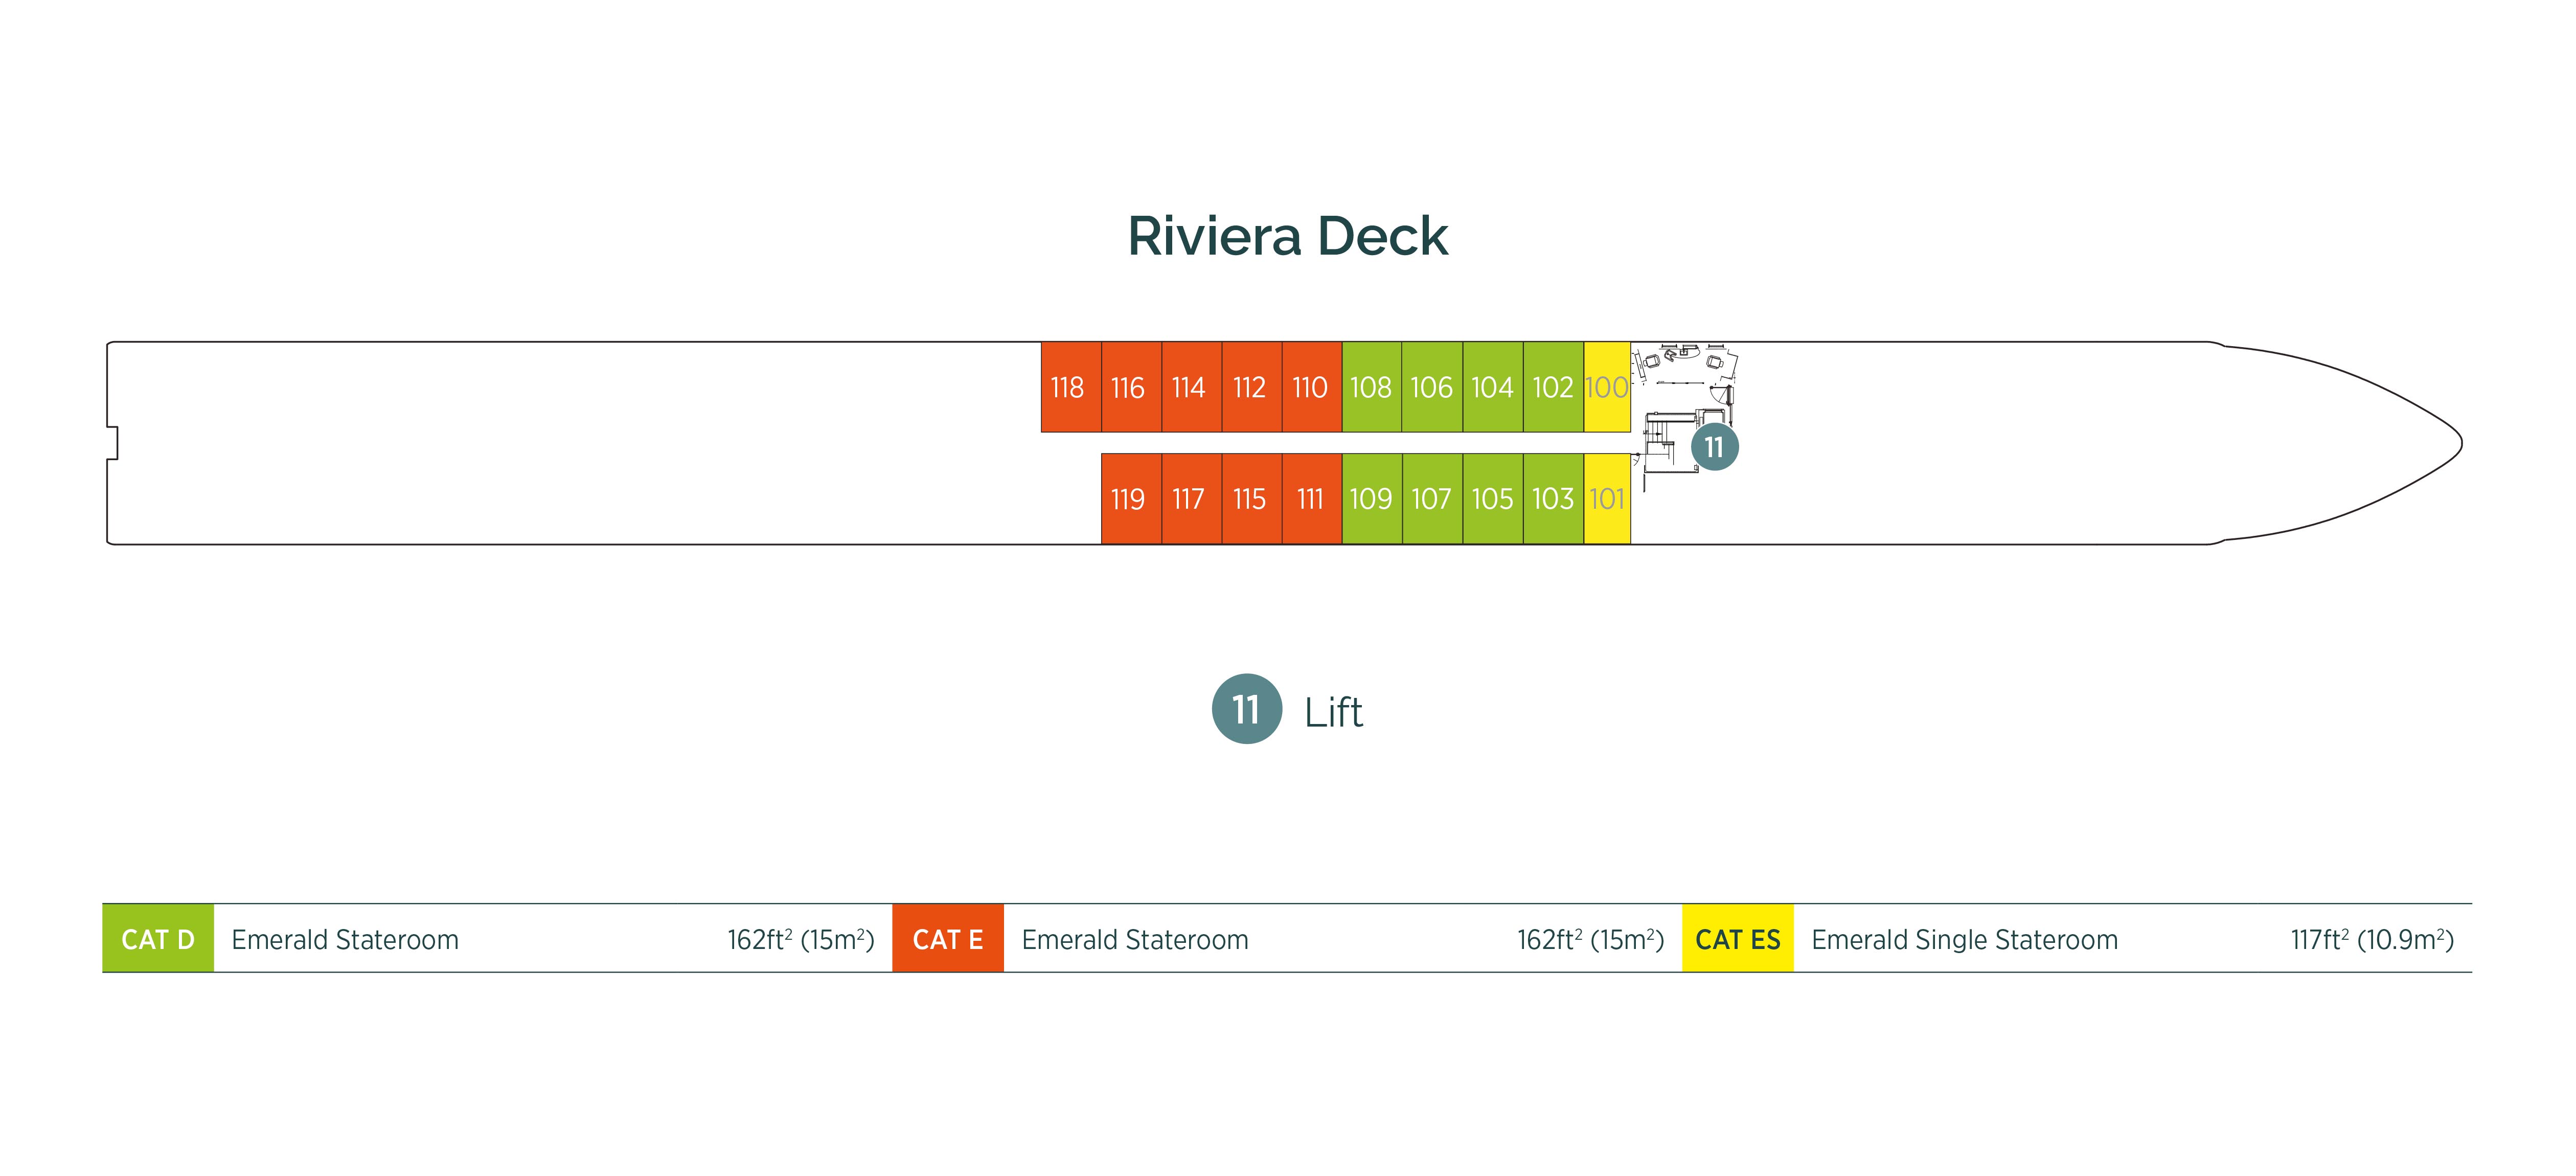 Diagram of ship layout for the Riviera Deck of an Emerald Cruises Europe river cruising Star-Ship